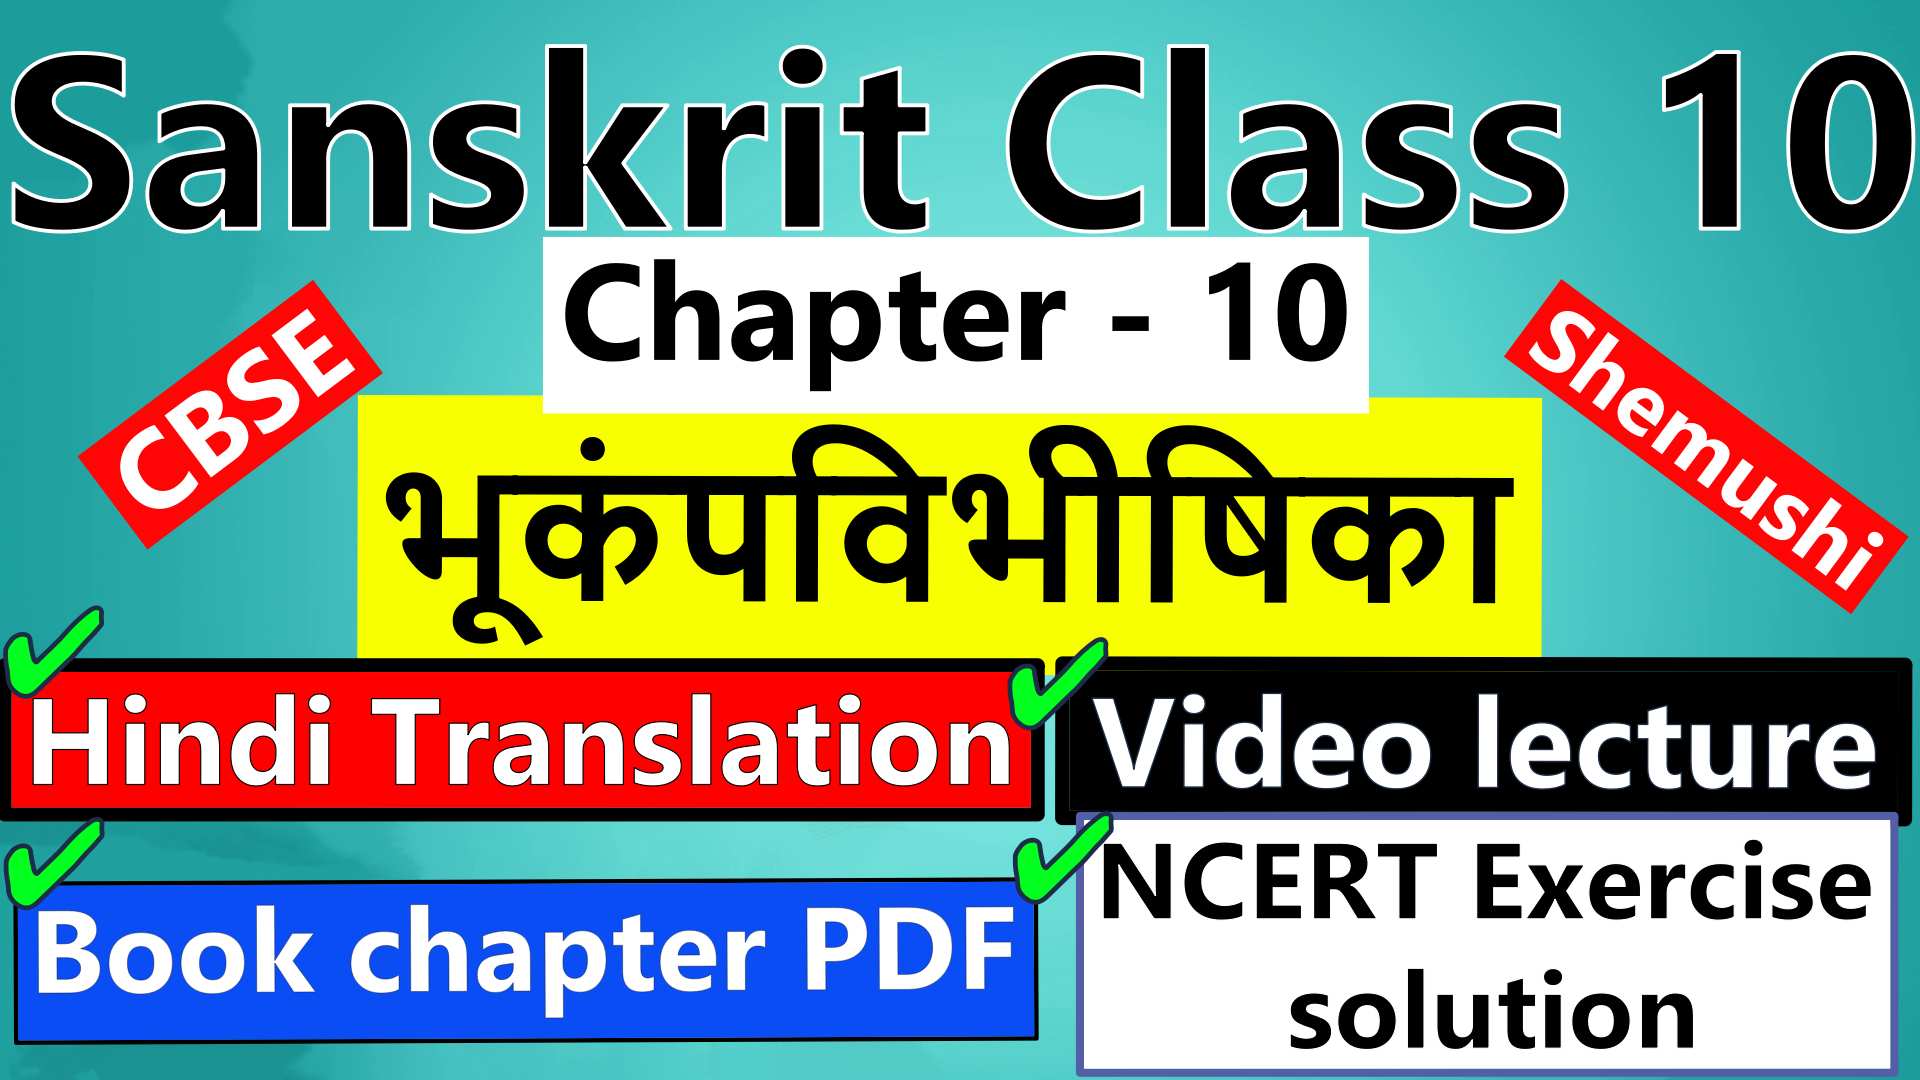 sanskrit-class-10-chapter-10-भूकंपविभीषिका-Hindi-Translation-Video-lecture-NCERT-Exercise-Solution-Question-Answer-Book-chapter-PDF